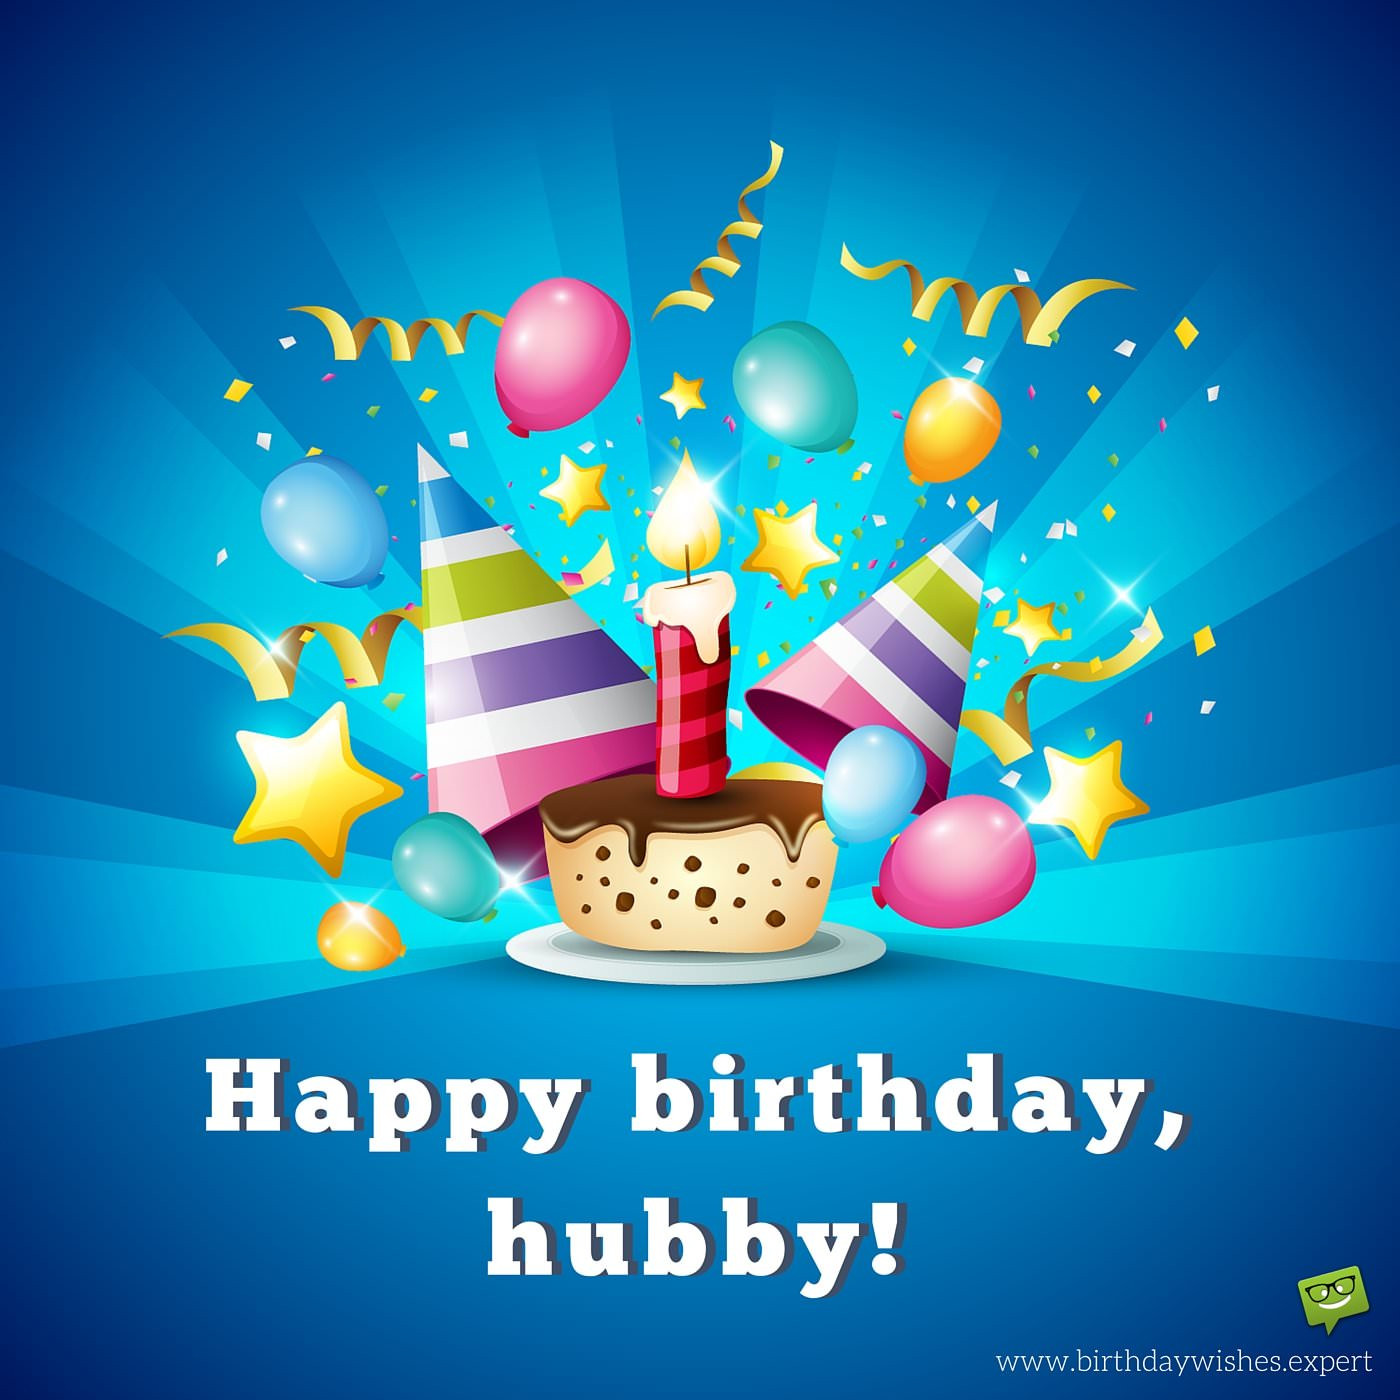 Birthday Wishes To Your Husband
 50 Romantic Birthday Wishes for your Husband